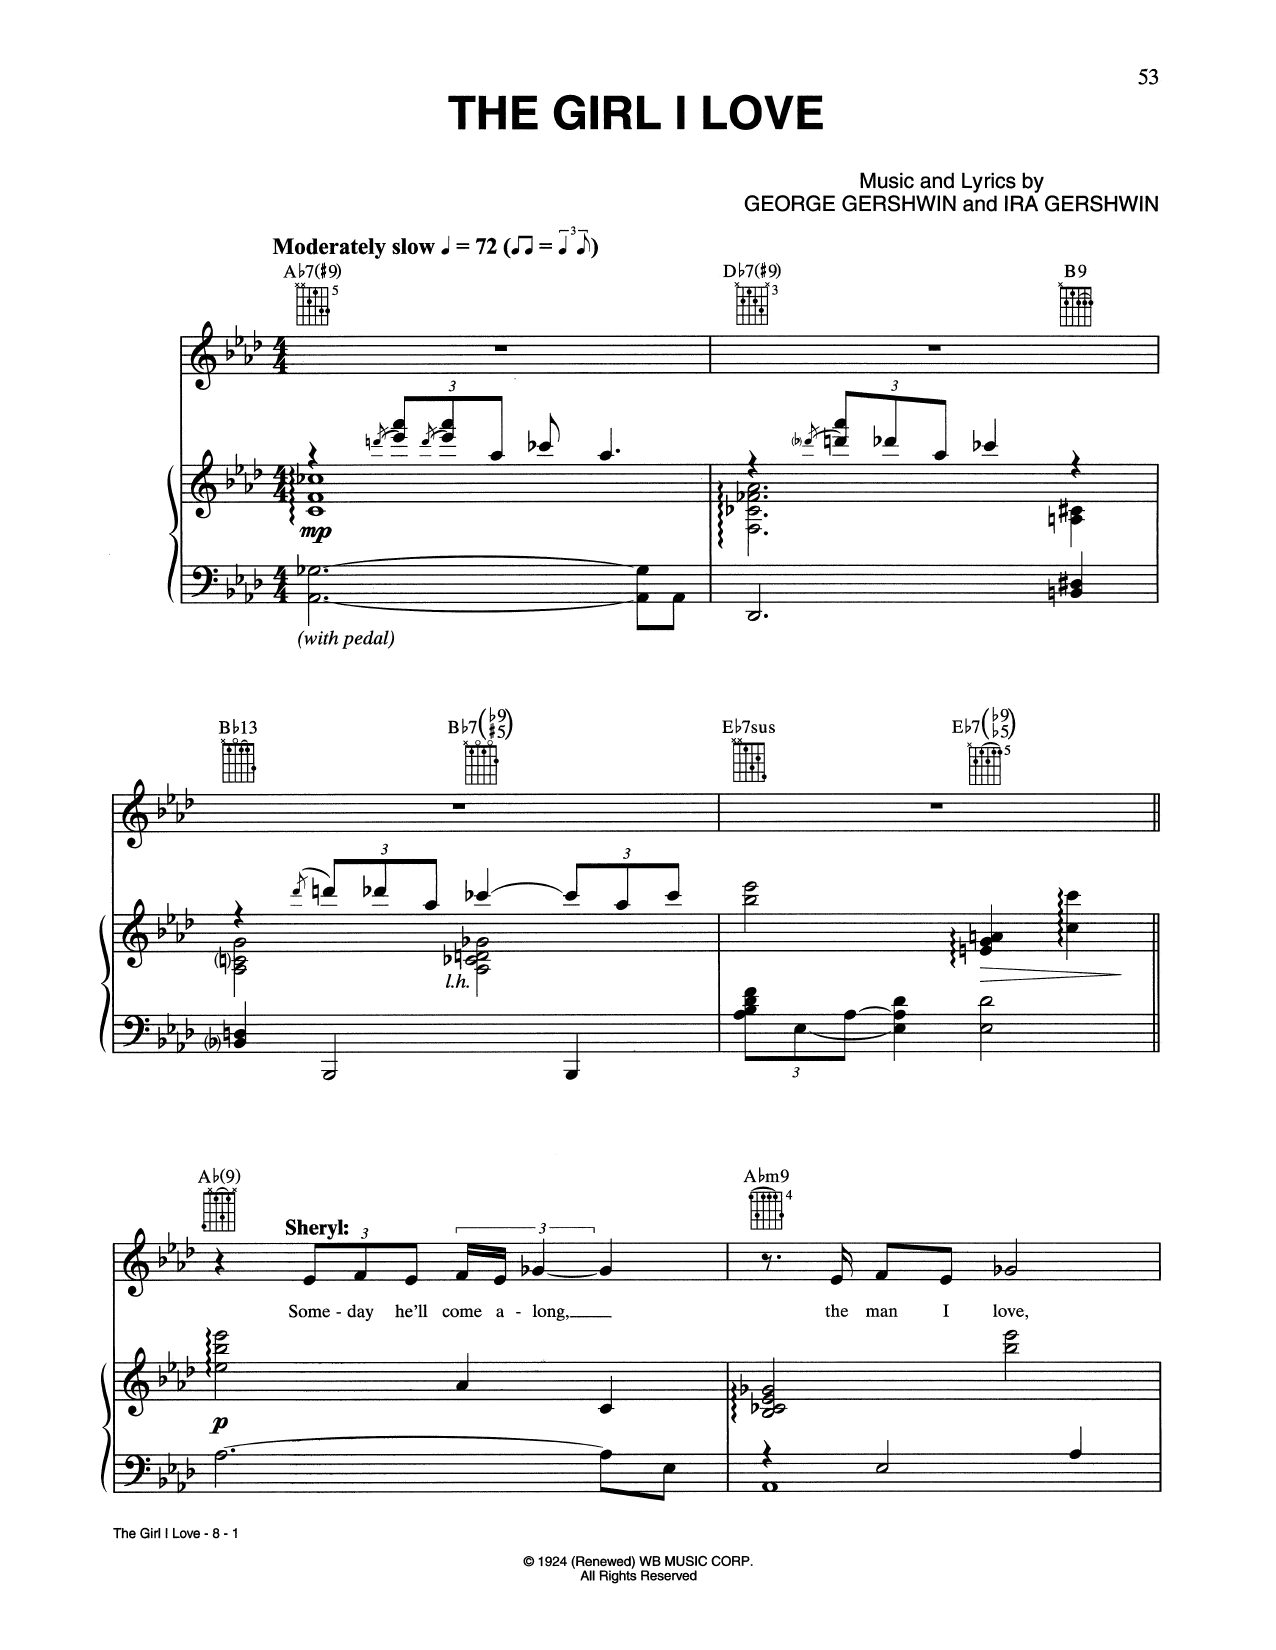 Tony Bennett & Sheryl Crow The Girl I Love sheet music preview music notes and score for Piano, Vocal & Guitar (Right-Hand Melody) including 8 page(s)